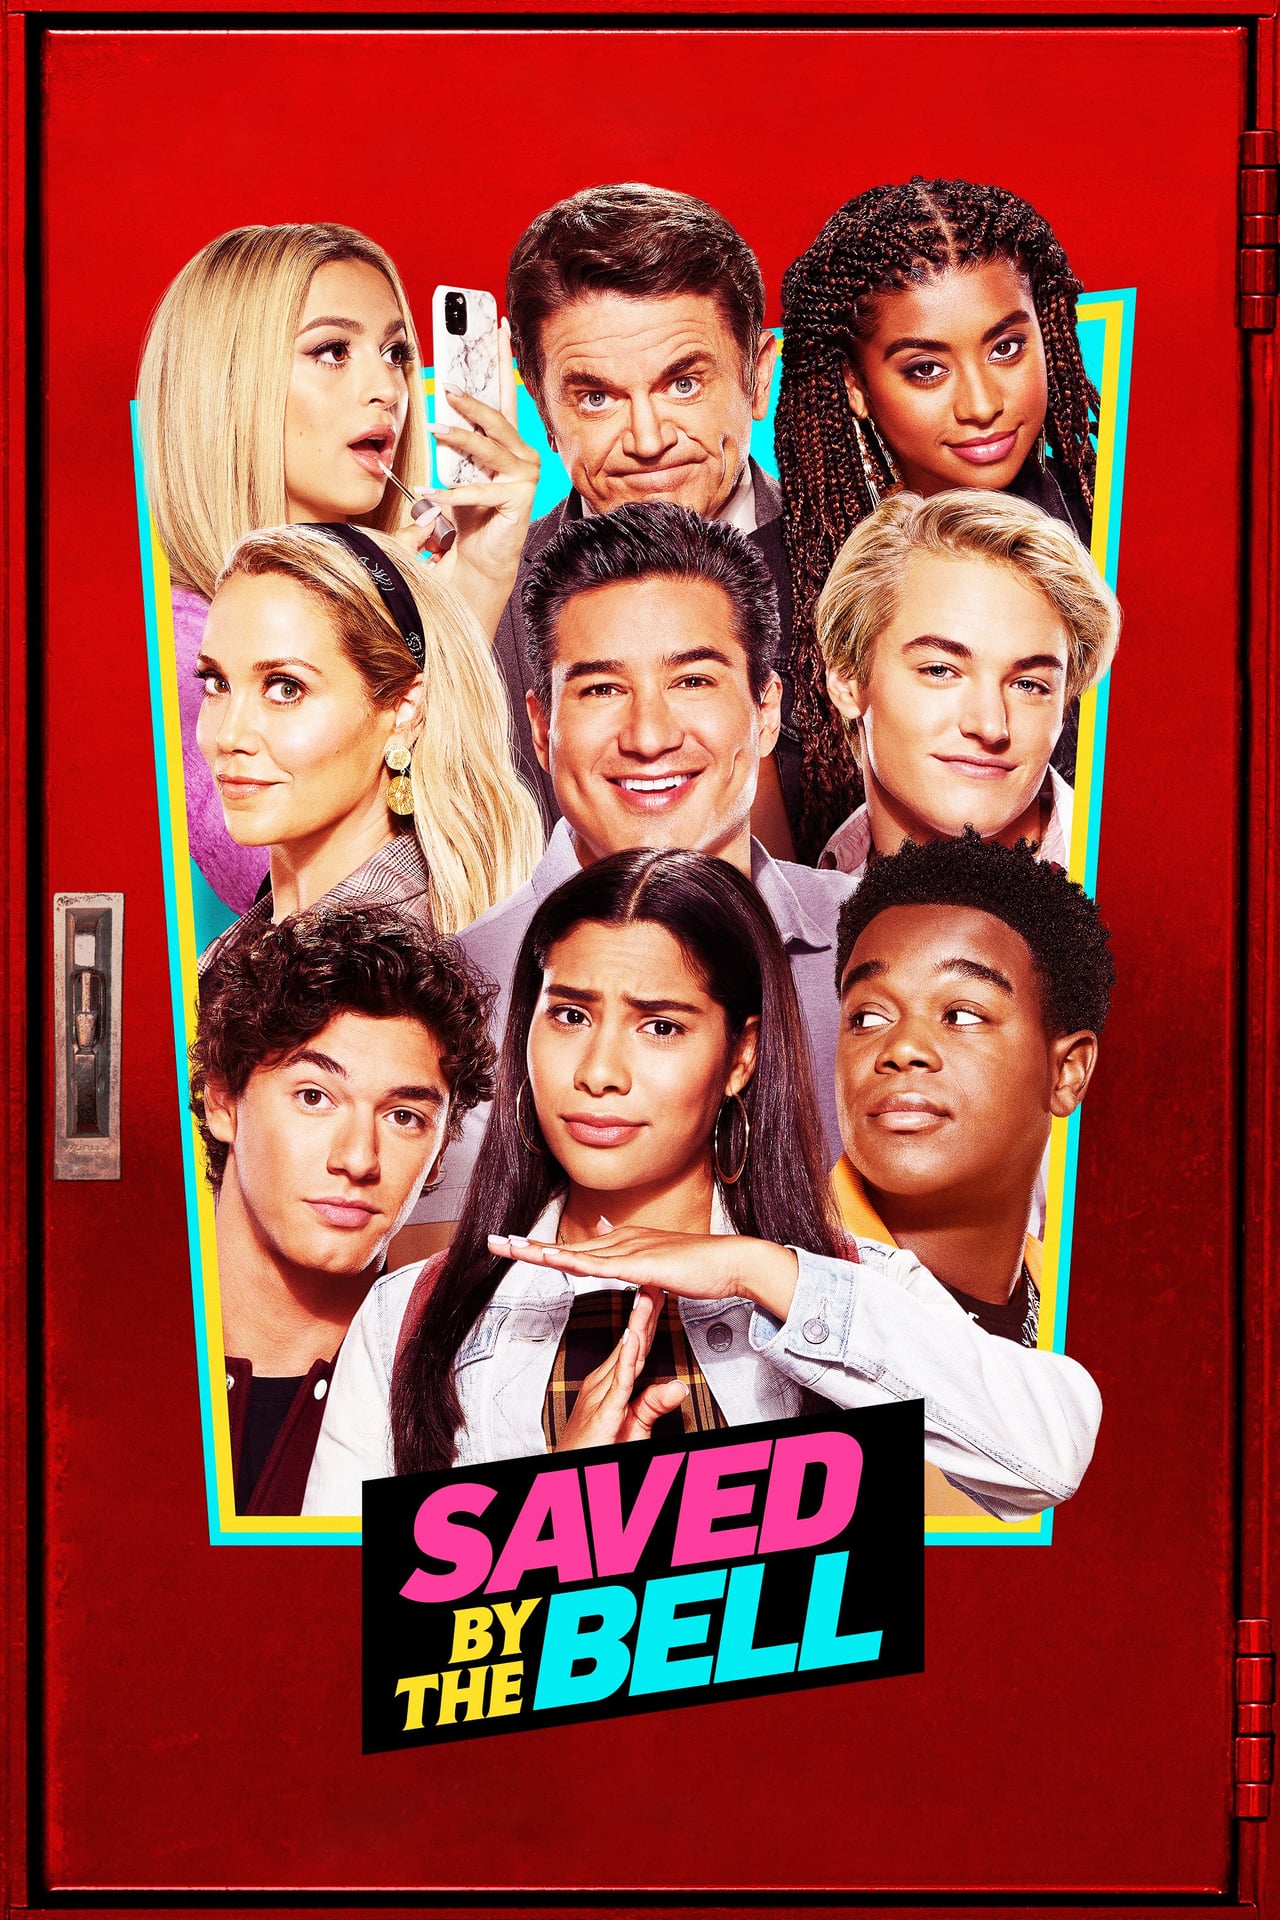 Saved by the Bell (season 2)